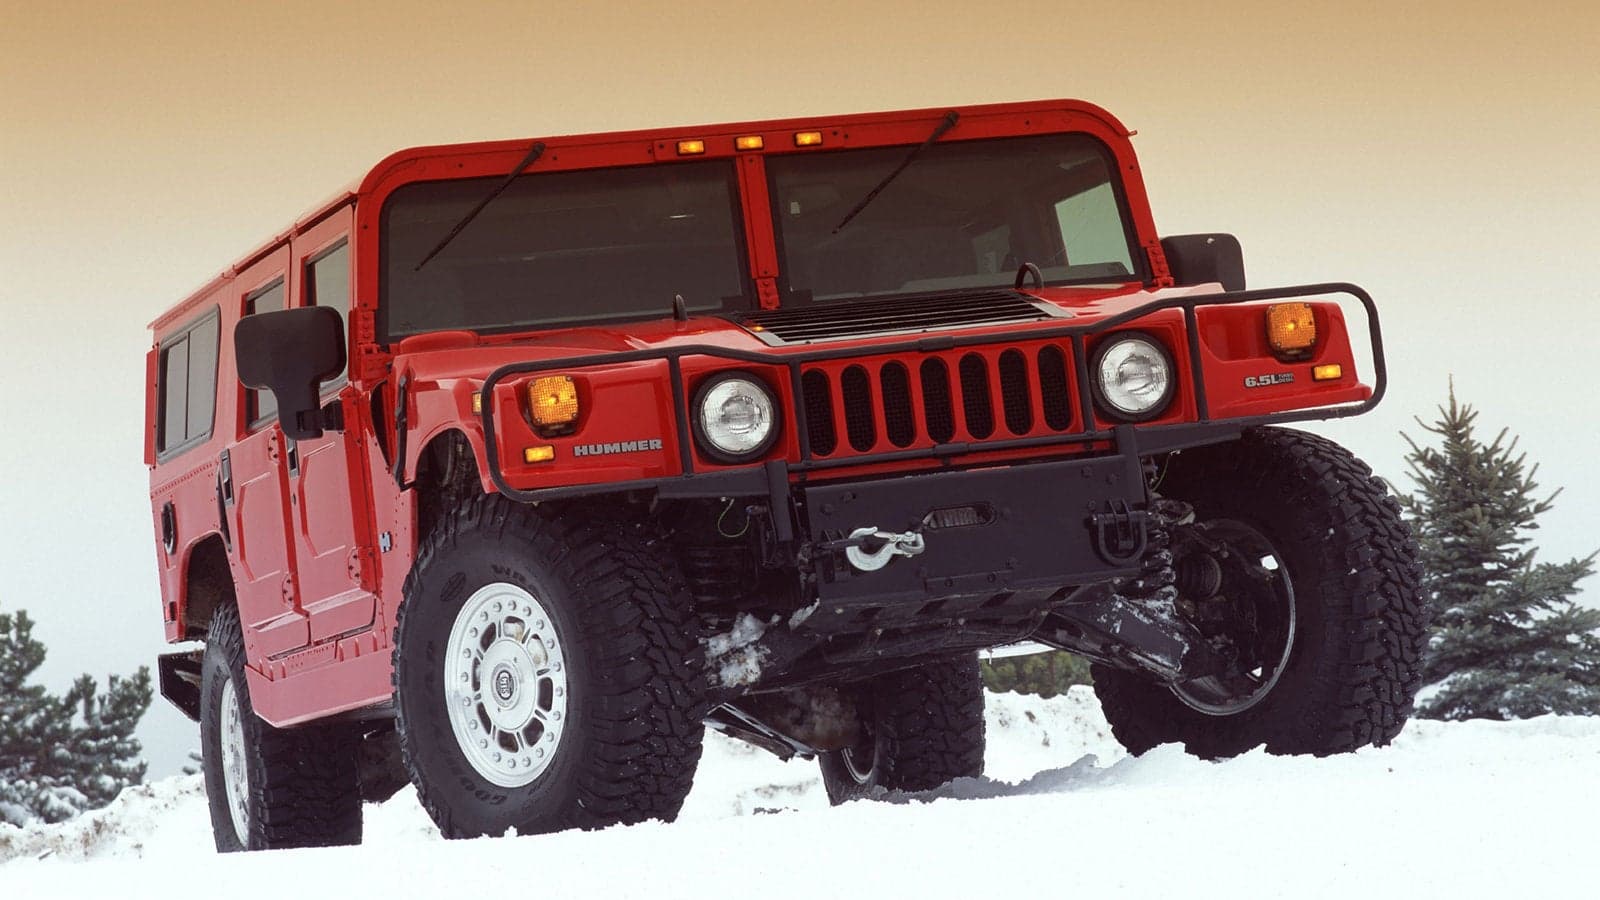 GM Could Revive Hummer as Purely Electric Pickup Truck, Off-Road SUV Brand: Report